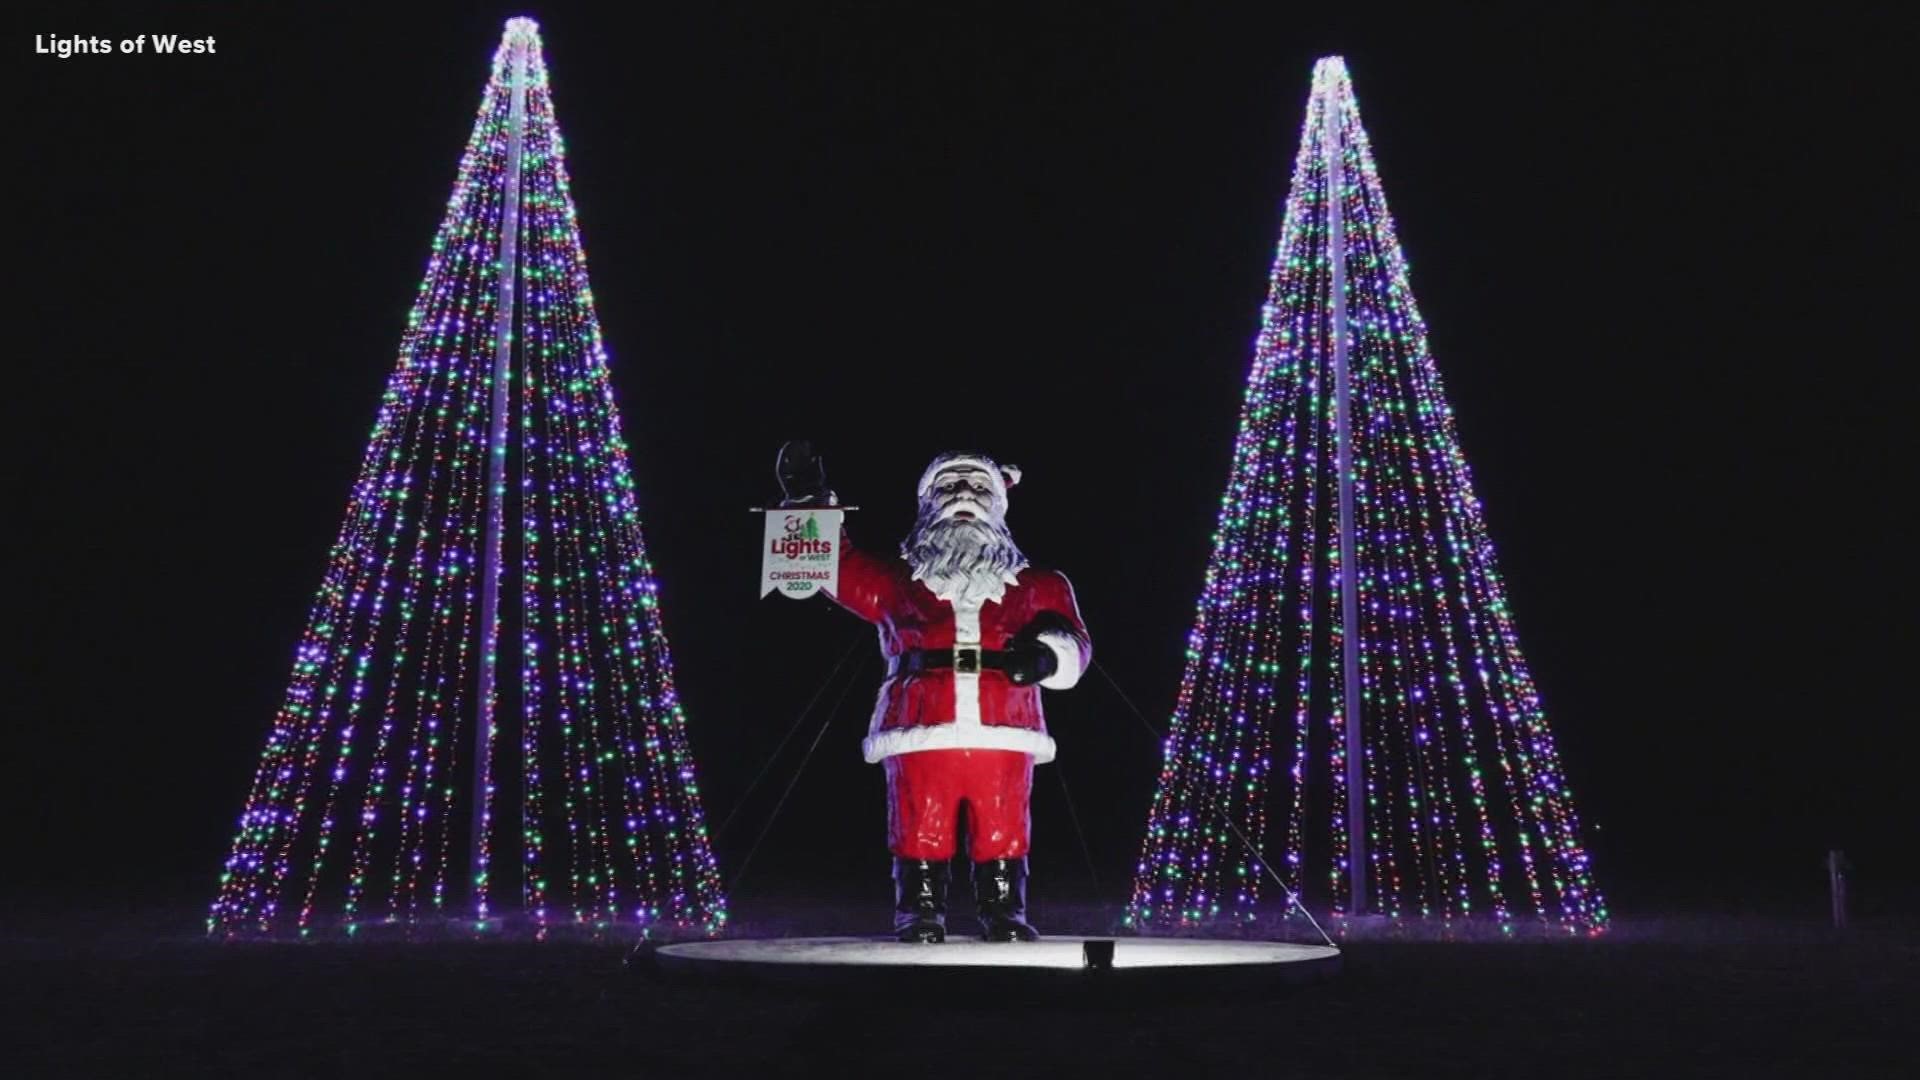 Waco Tours has partnered with Lights of West to bring some holiday cheer to Central Texas.